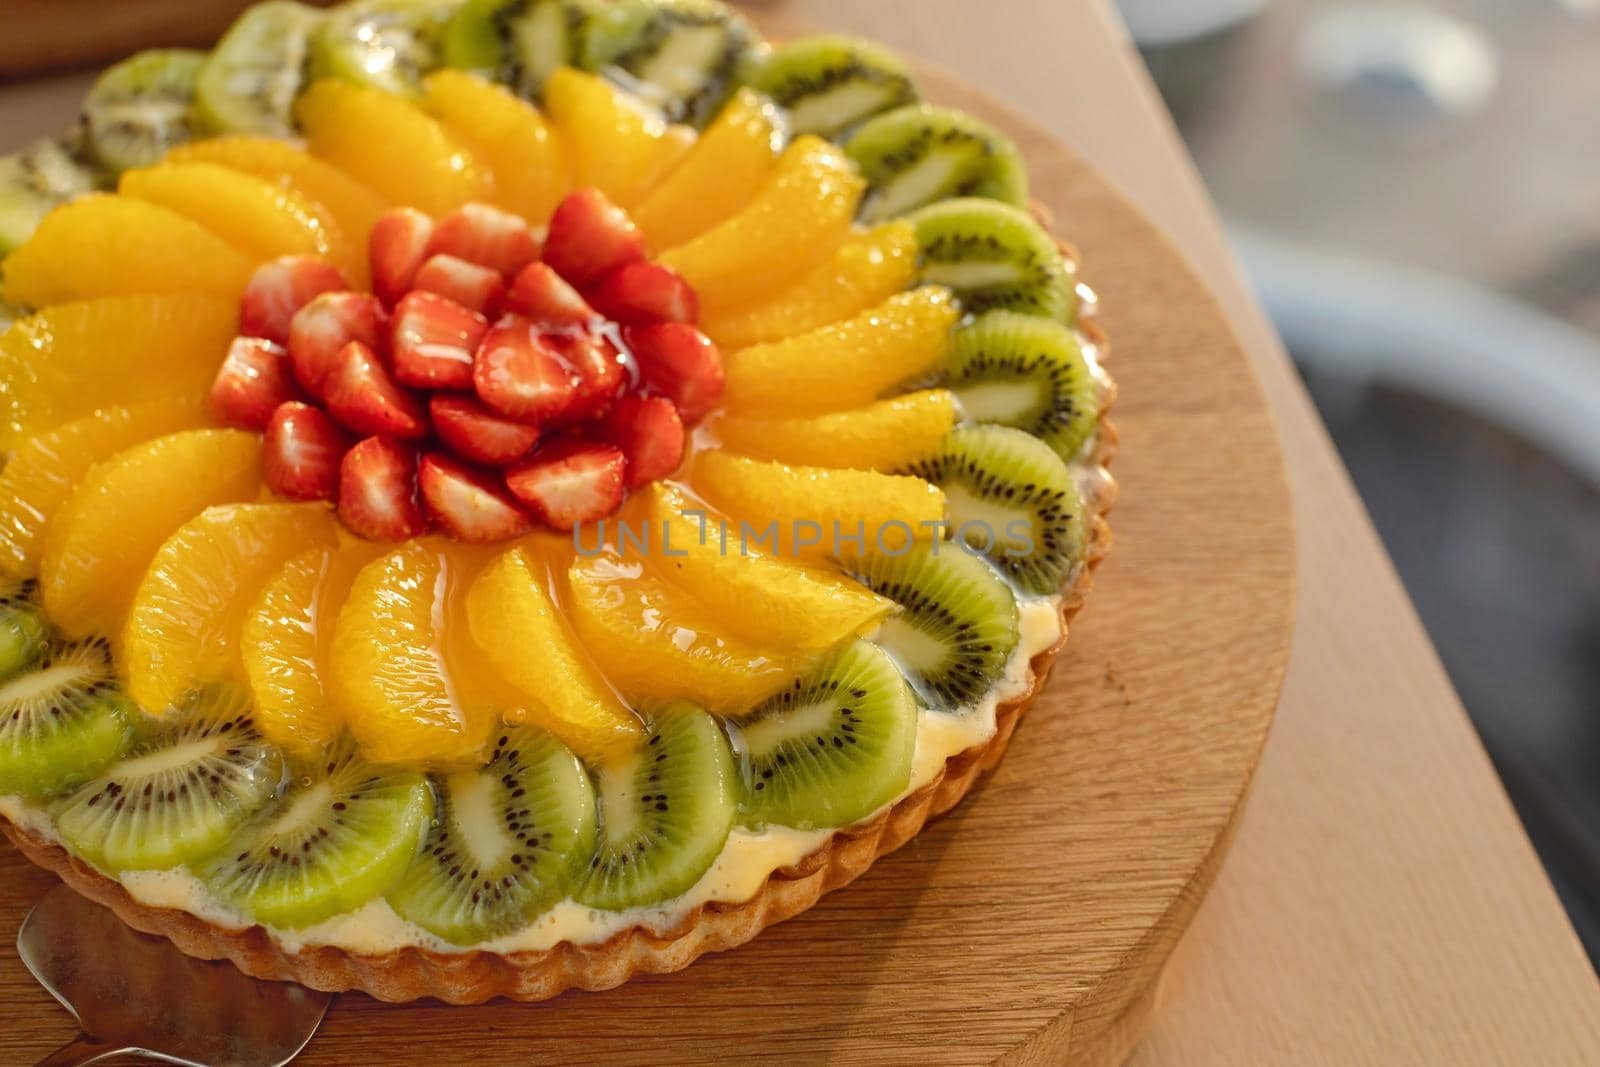 Colourful decorated fruit cake on wooden plate by Demkat